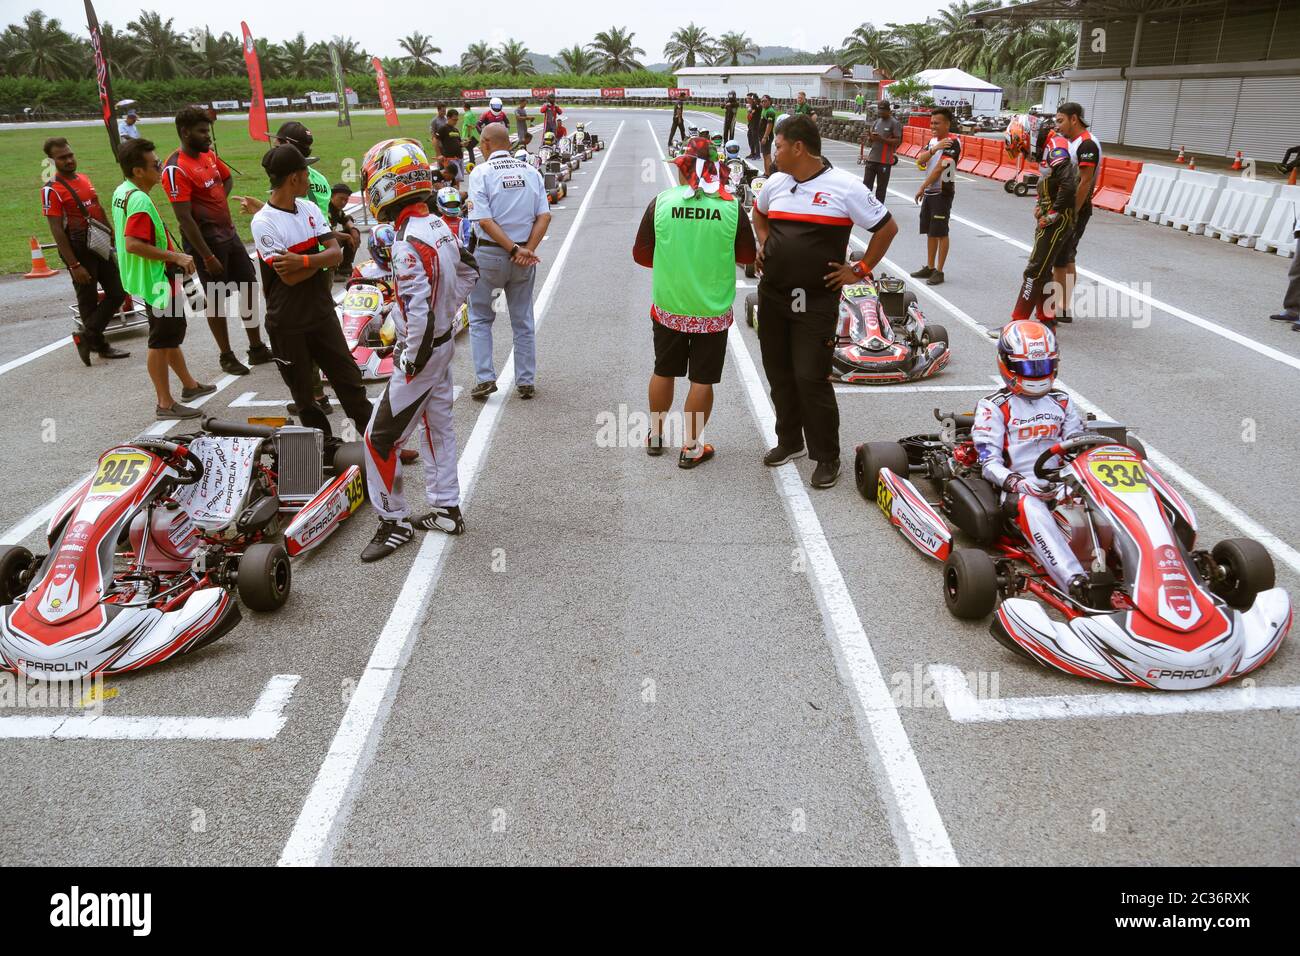 Kart racers getting ready on the starting point of the race track. Stock Photo